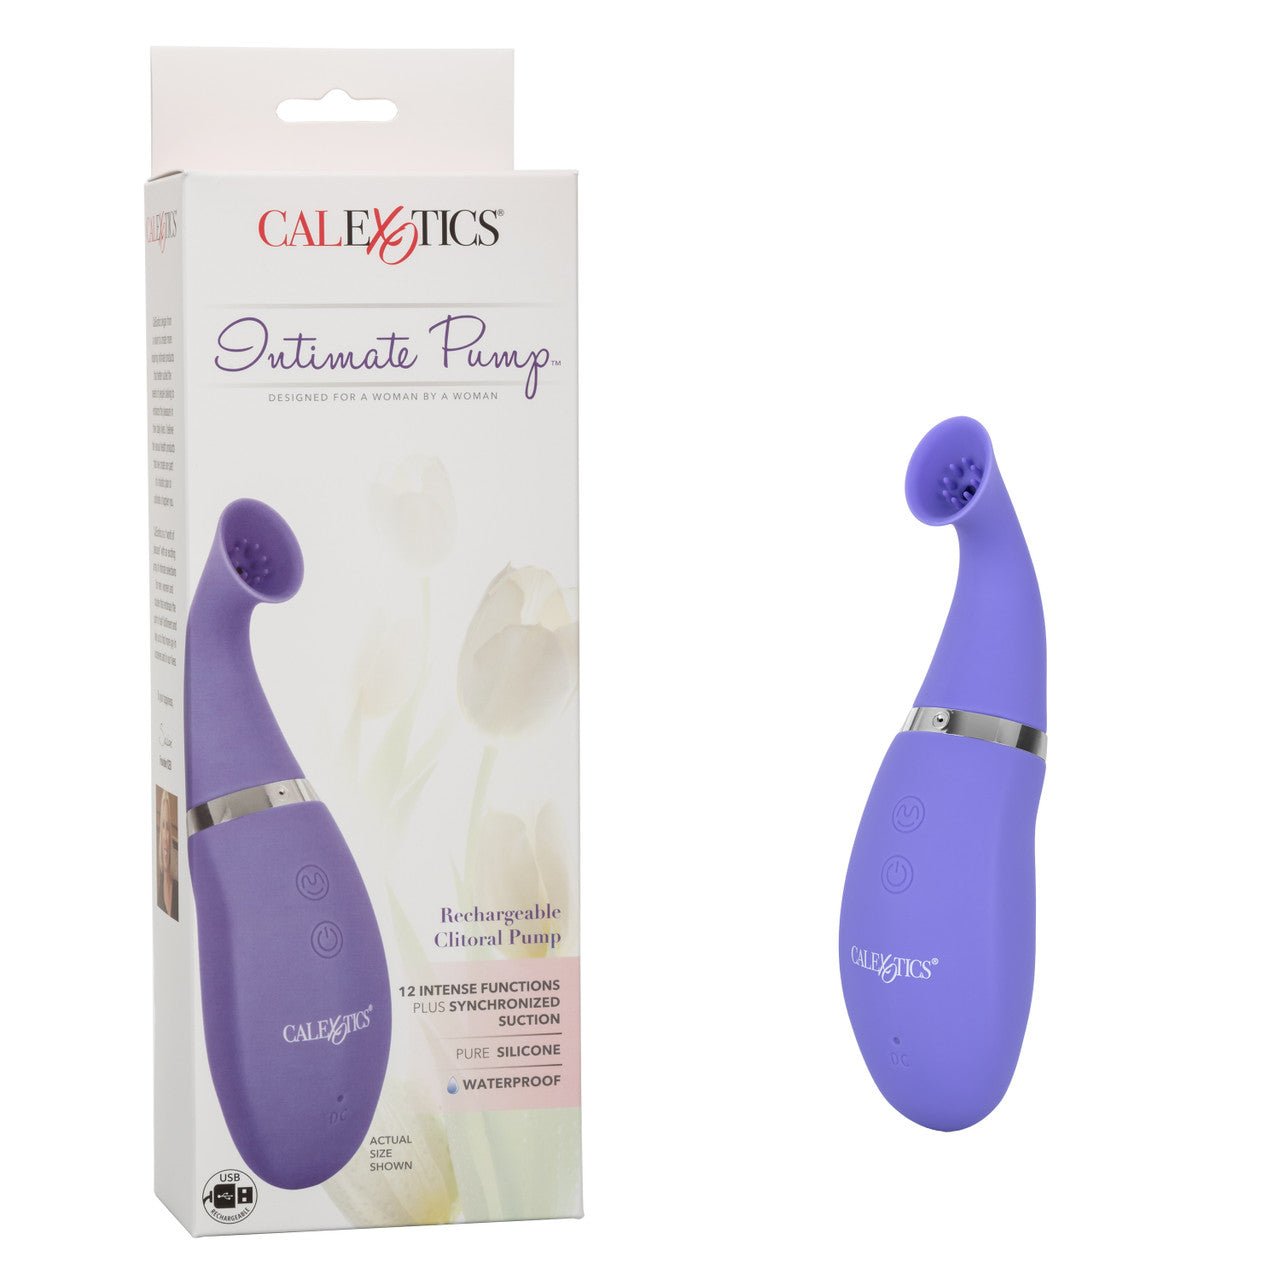 Intimate Pump Rechargeable Clitoral Pump